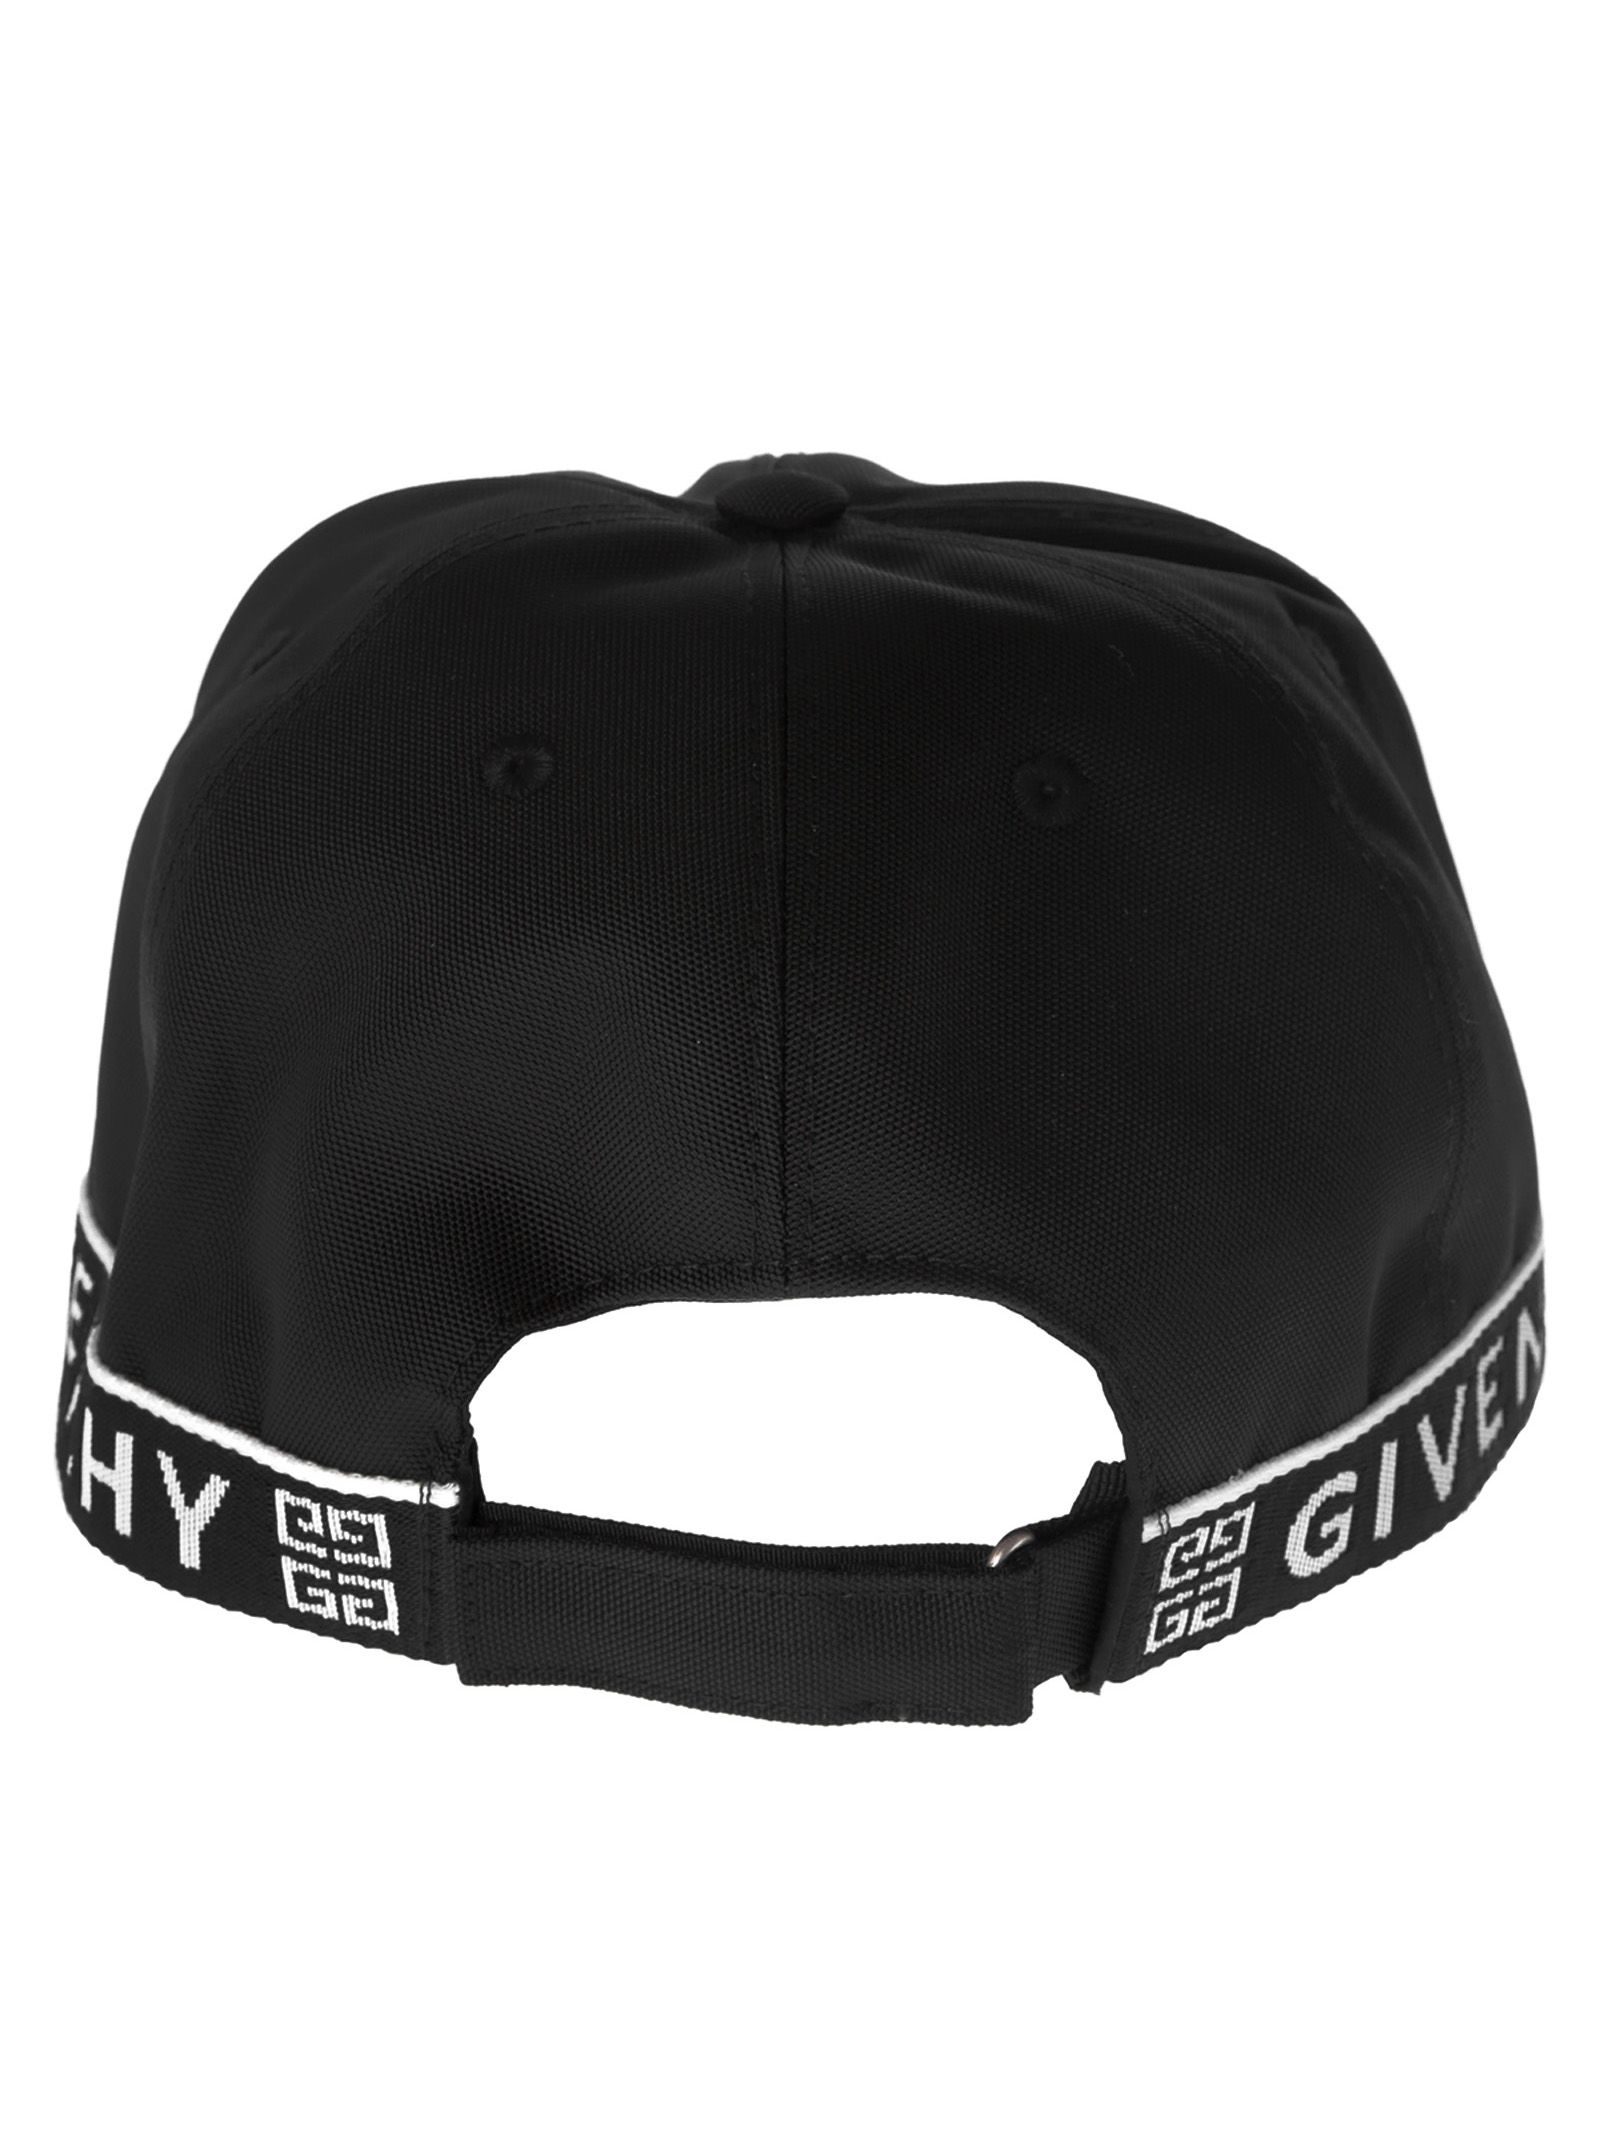 italist | Best price in the market for Givenchy Givenchy 4g Cap